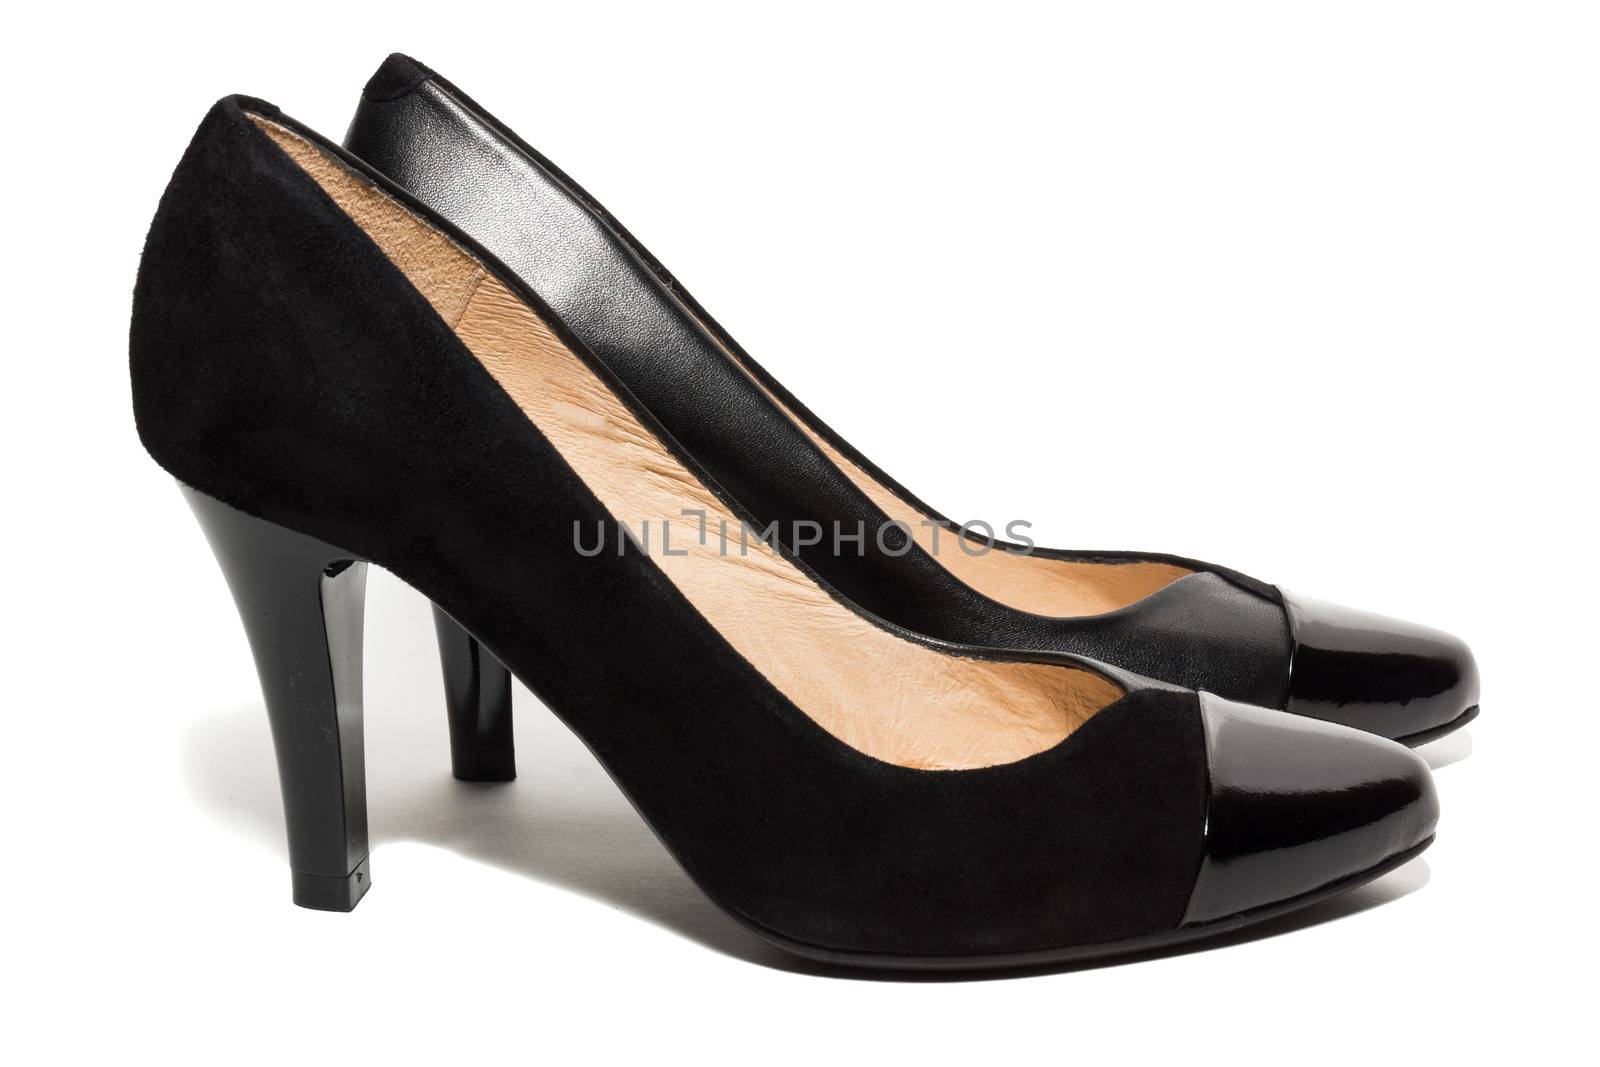 The picture shows the female shoes on a white background